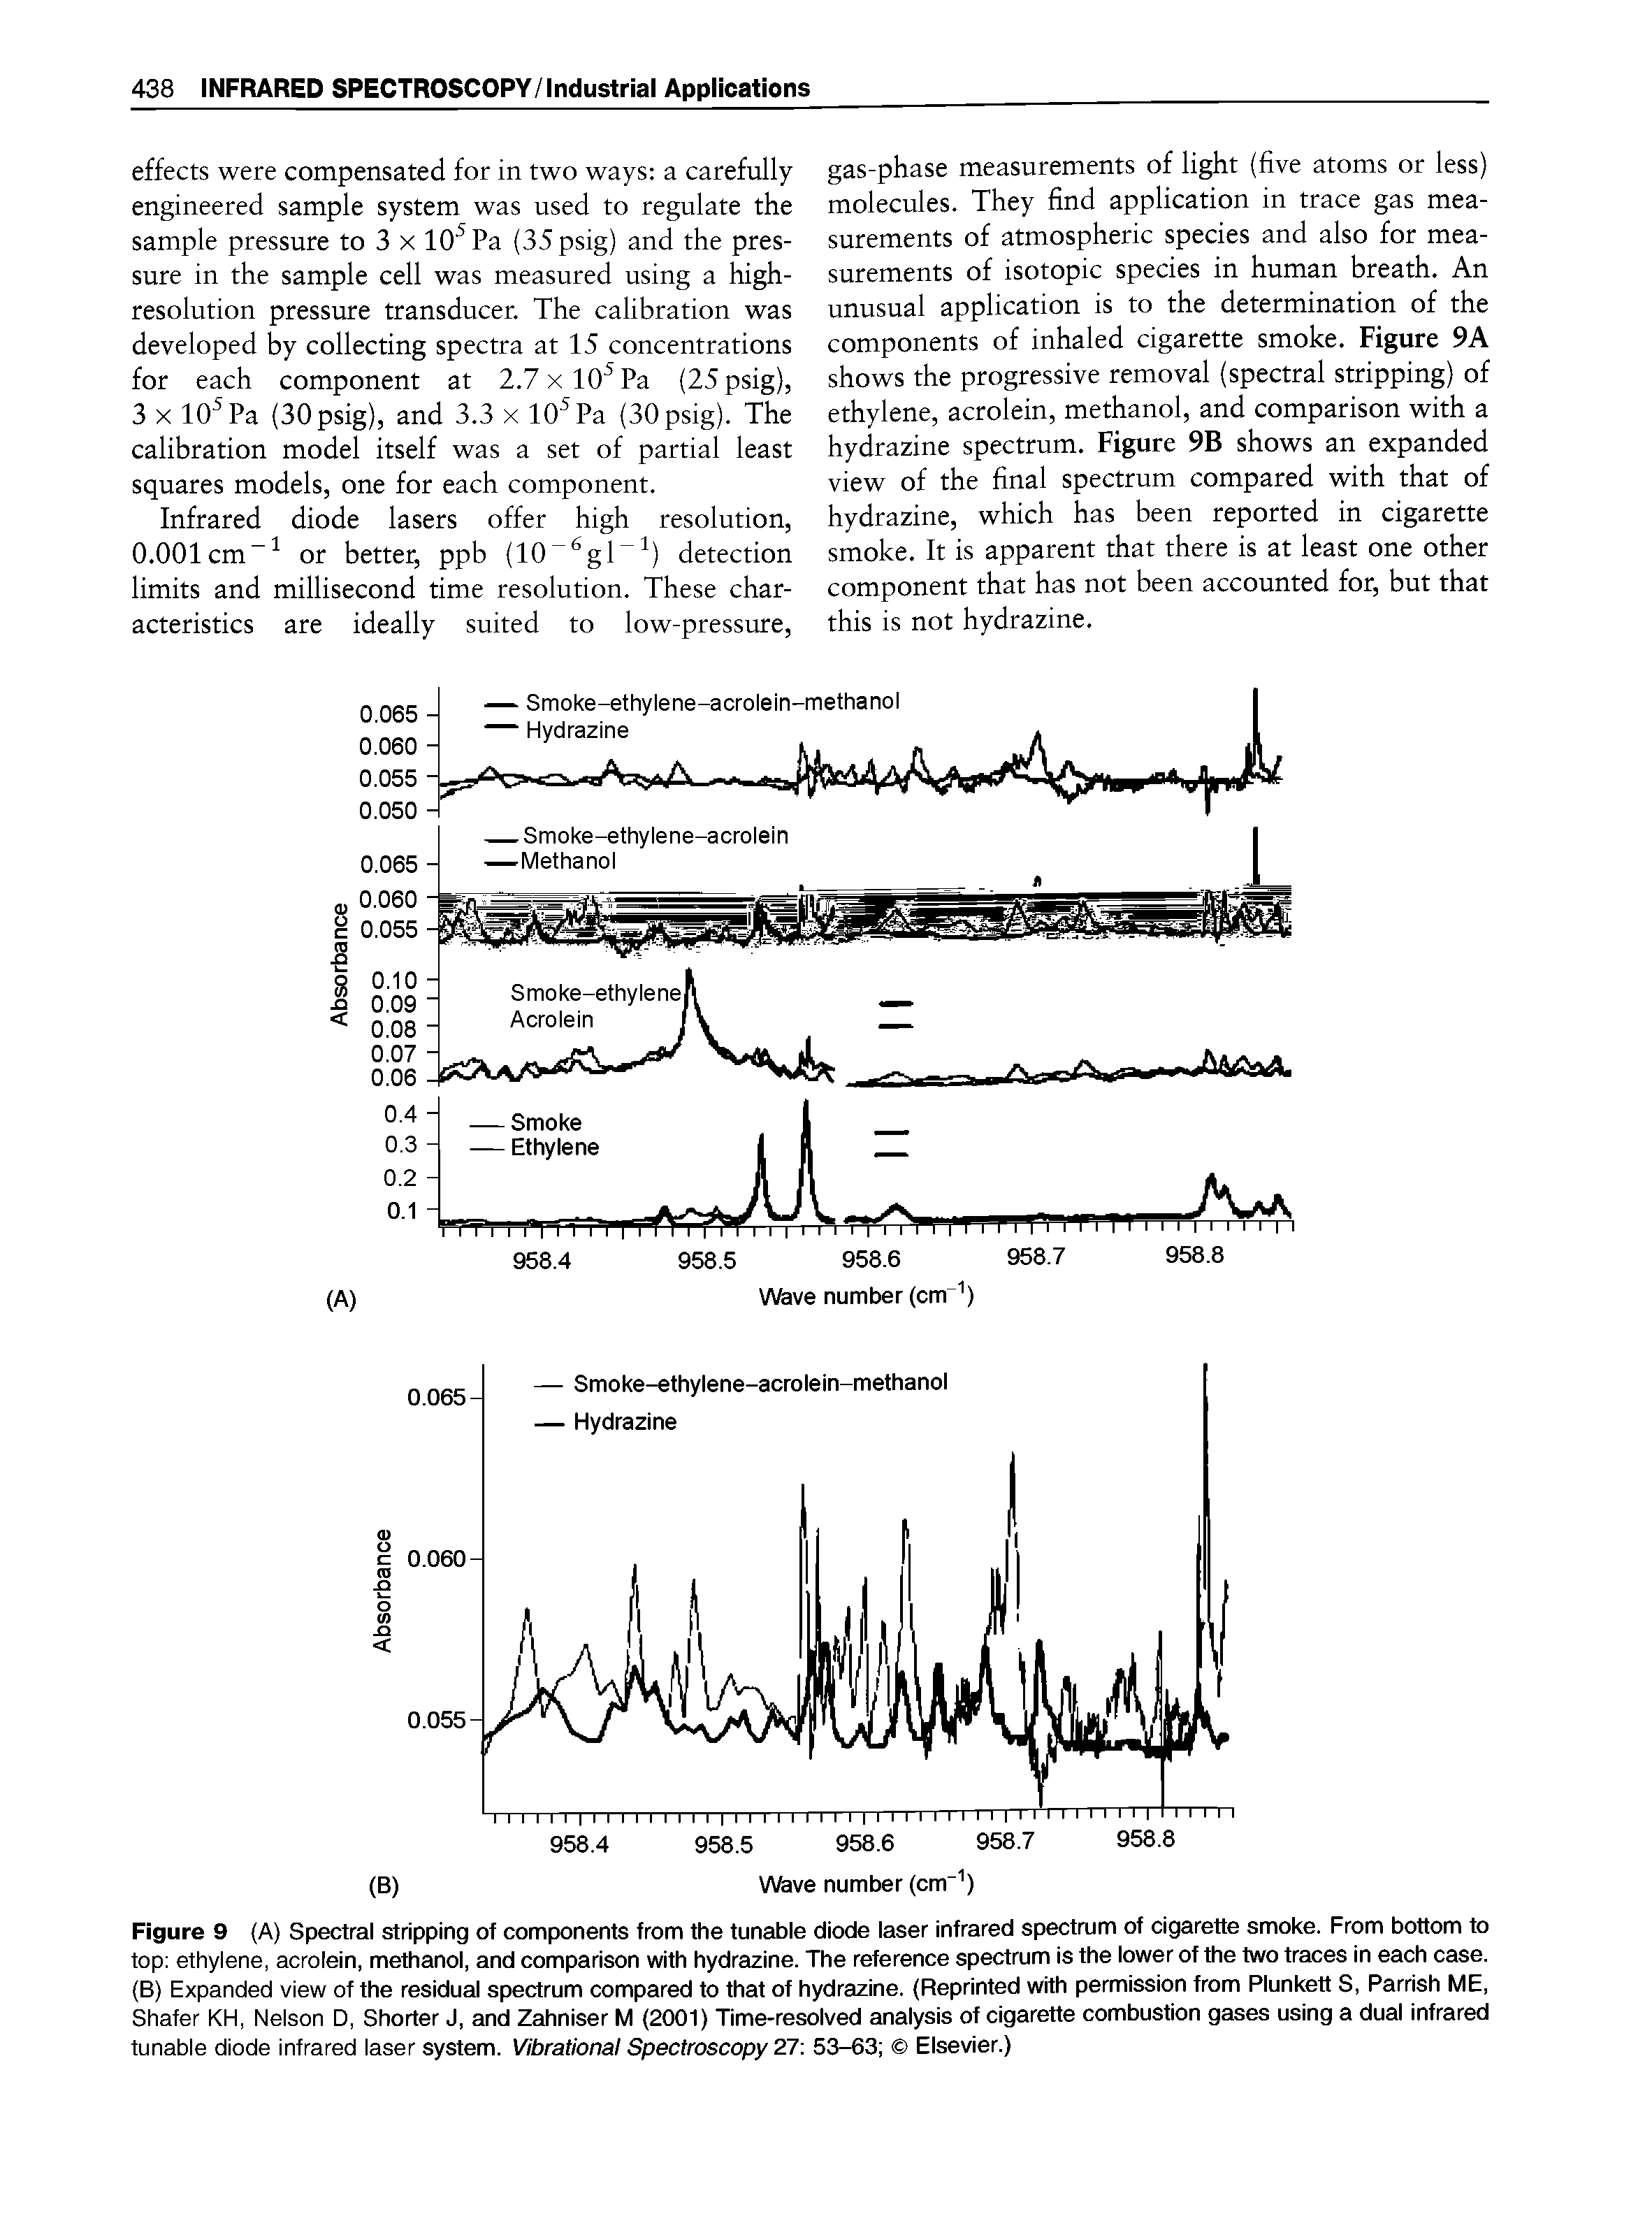 Figure 9 (A) Spectral stripping of components from the tunable diode laser infrared spectrum of cigarette smoke. From bottom to top ethylene, acrolein, methanol, and comparison with hydrazine. The reference spectrum is the lower of the two traces in each case. (B) Expanded view of the residual spectrum compared to that of hydrazine. (Reprinted with permission from Plunkett S, Parrish ME, Shafer KH, Nelson D, Shorter J, and Zahniser M (2001) Time-resolved analysis of cigarette combustion gases using a dual infrared tunable diode infrared laser system. Vibrational Spectroscopy 27 53-63 Elsevier.)...